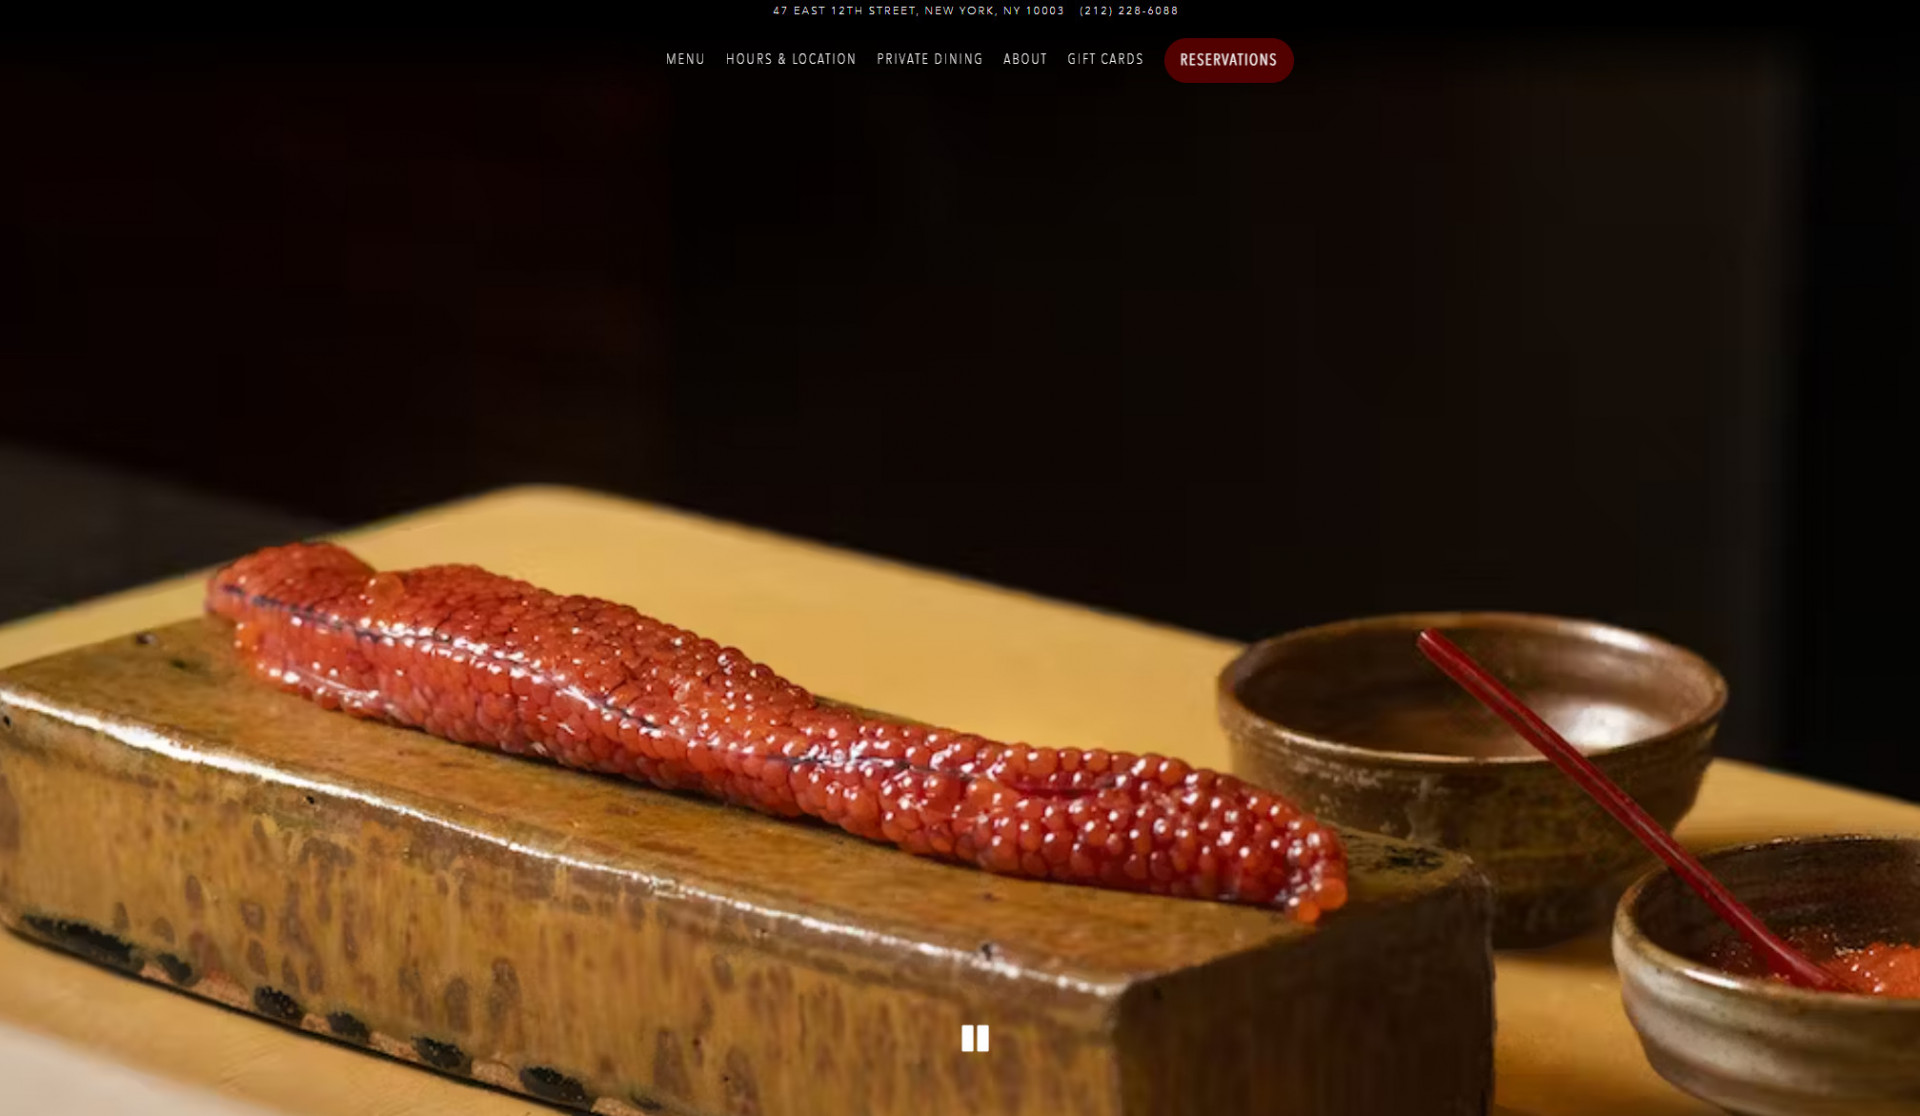 One of the top restaurant websites for sushi bars